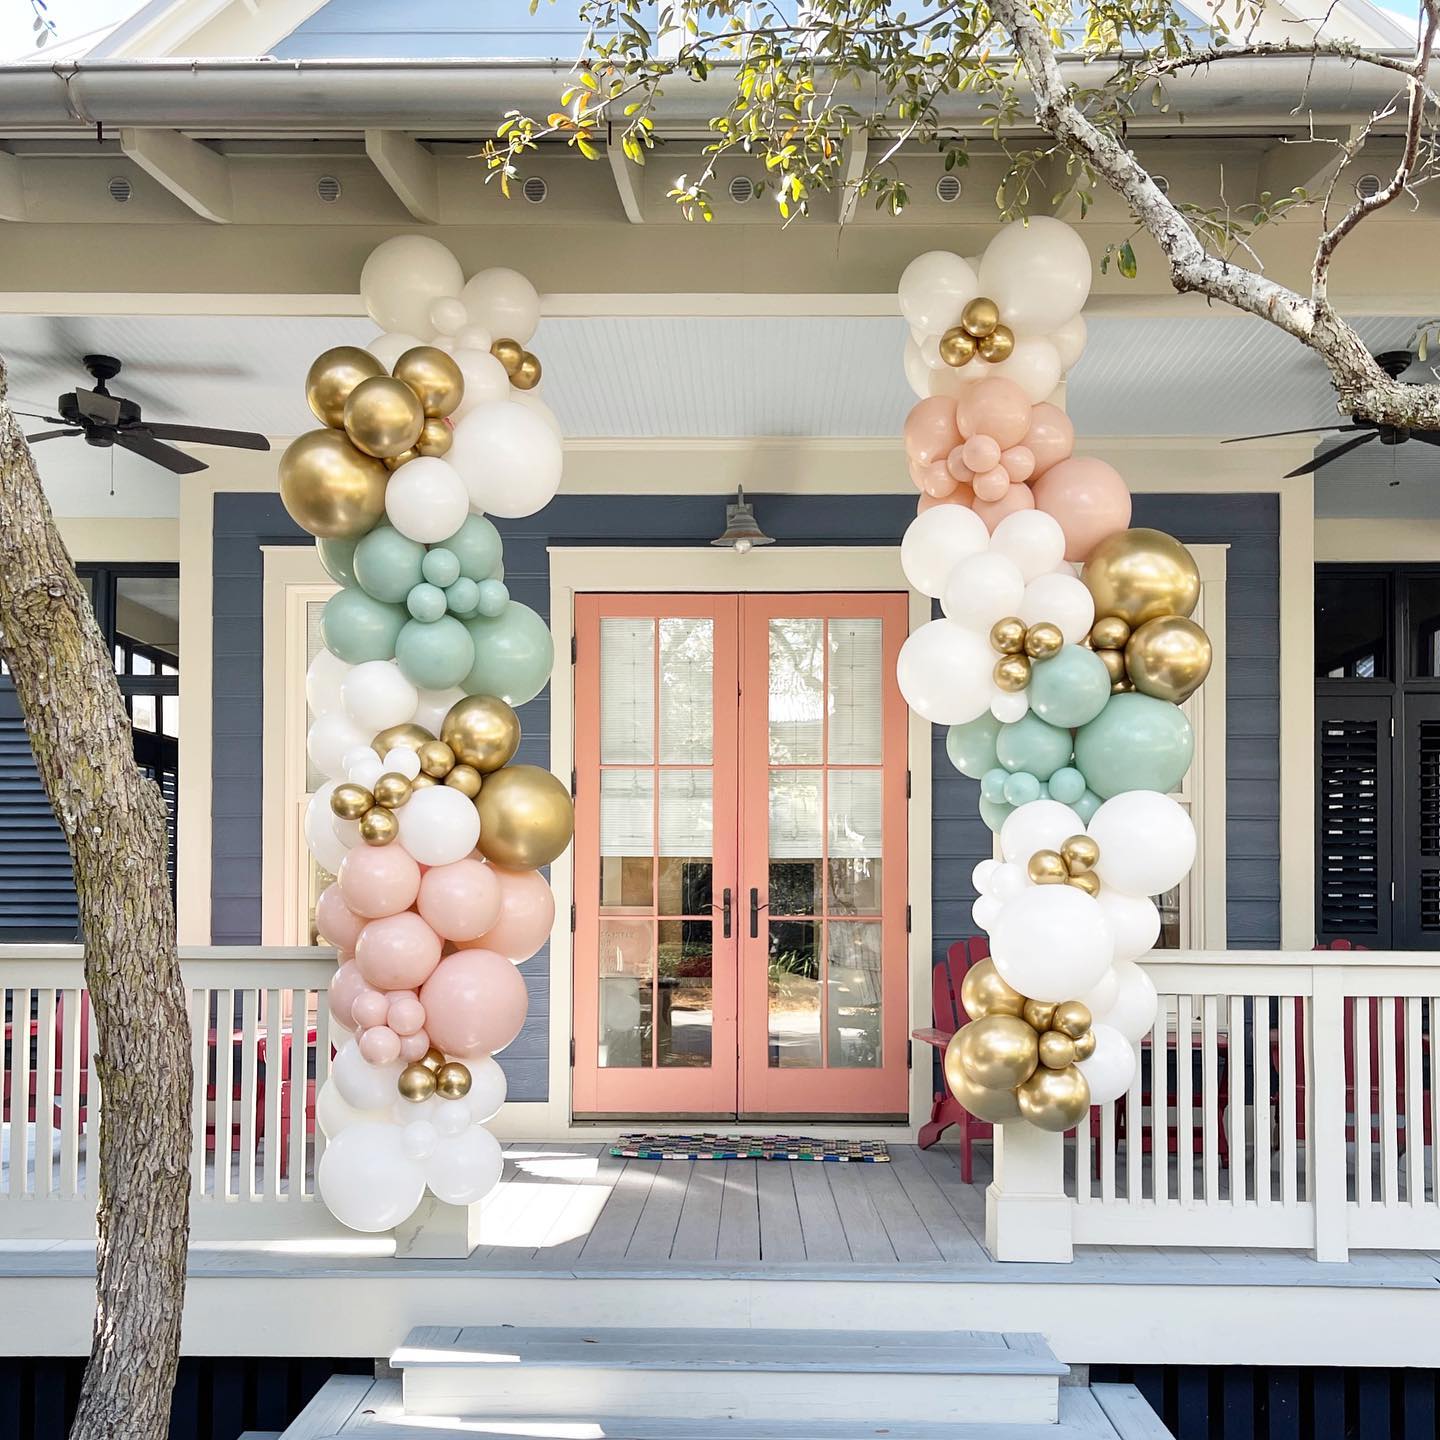 Dressing up your front porch is one of our favorite pastimes. 

#balloongarlands #balloongarland #organicballoons #organicballoongarland #balloondecoration #ballooncolumns #balloons #globos #balloonstylist #balloonboutique #balloonsofinstagram #balloonboss #30Aballoons #frontporchdecor #frontporchgoals